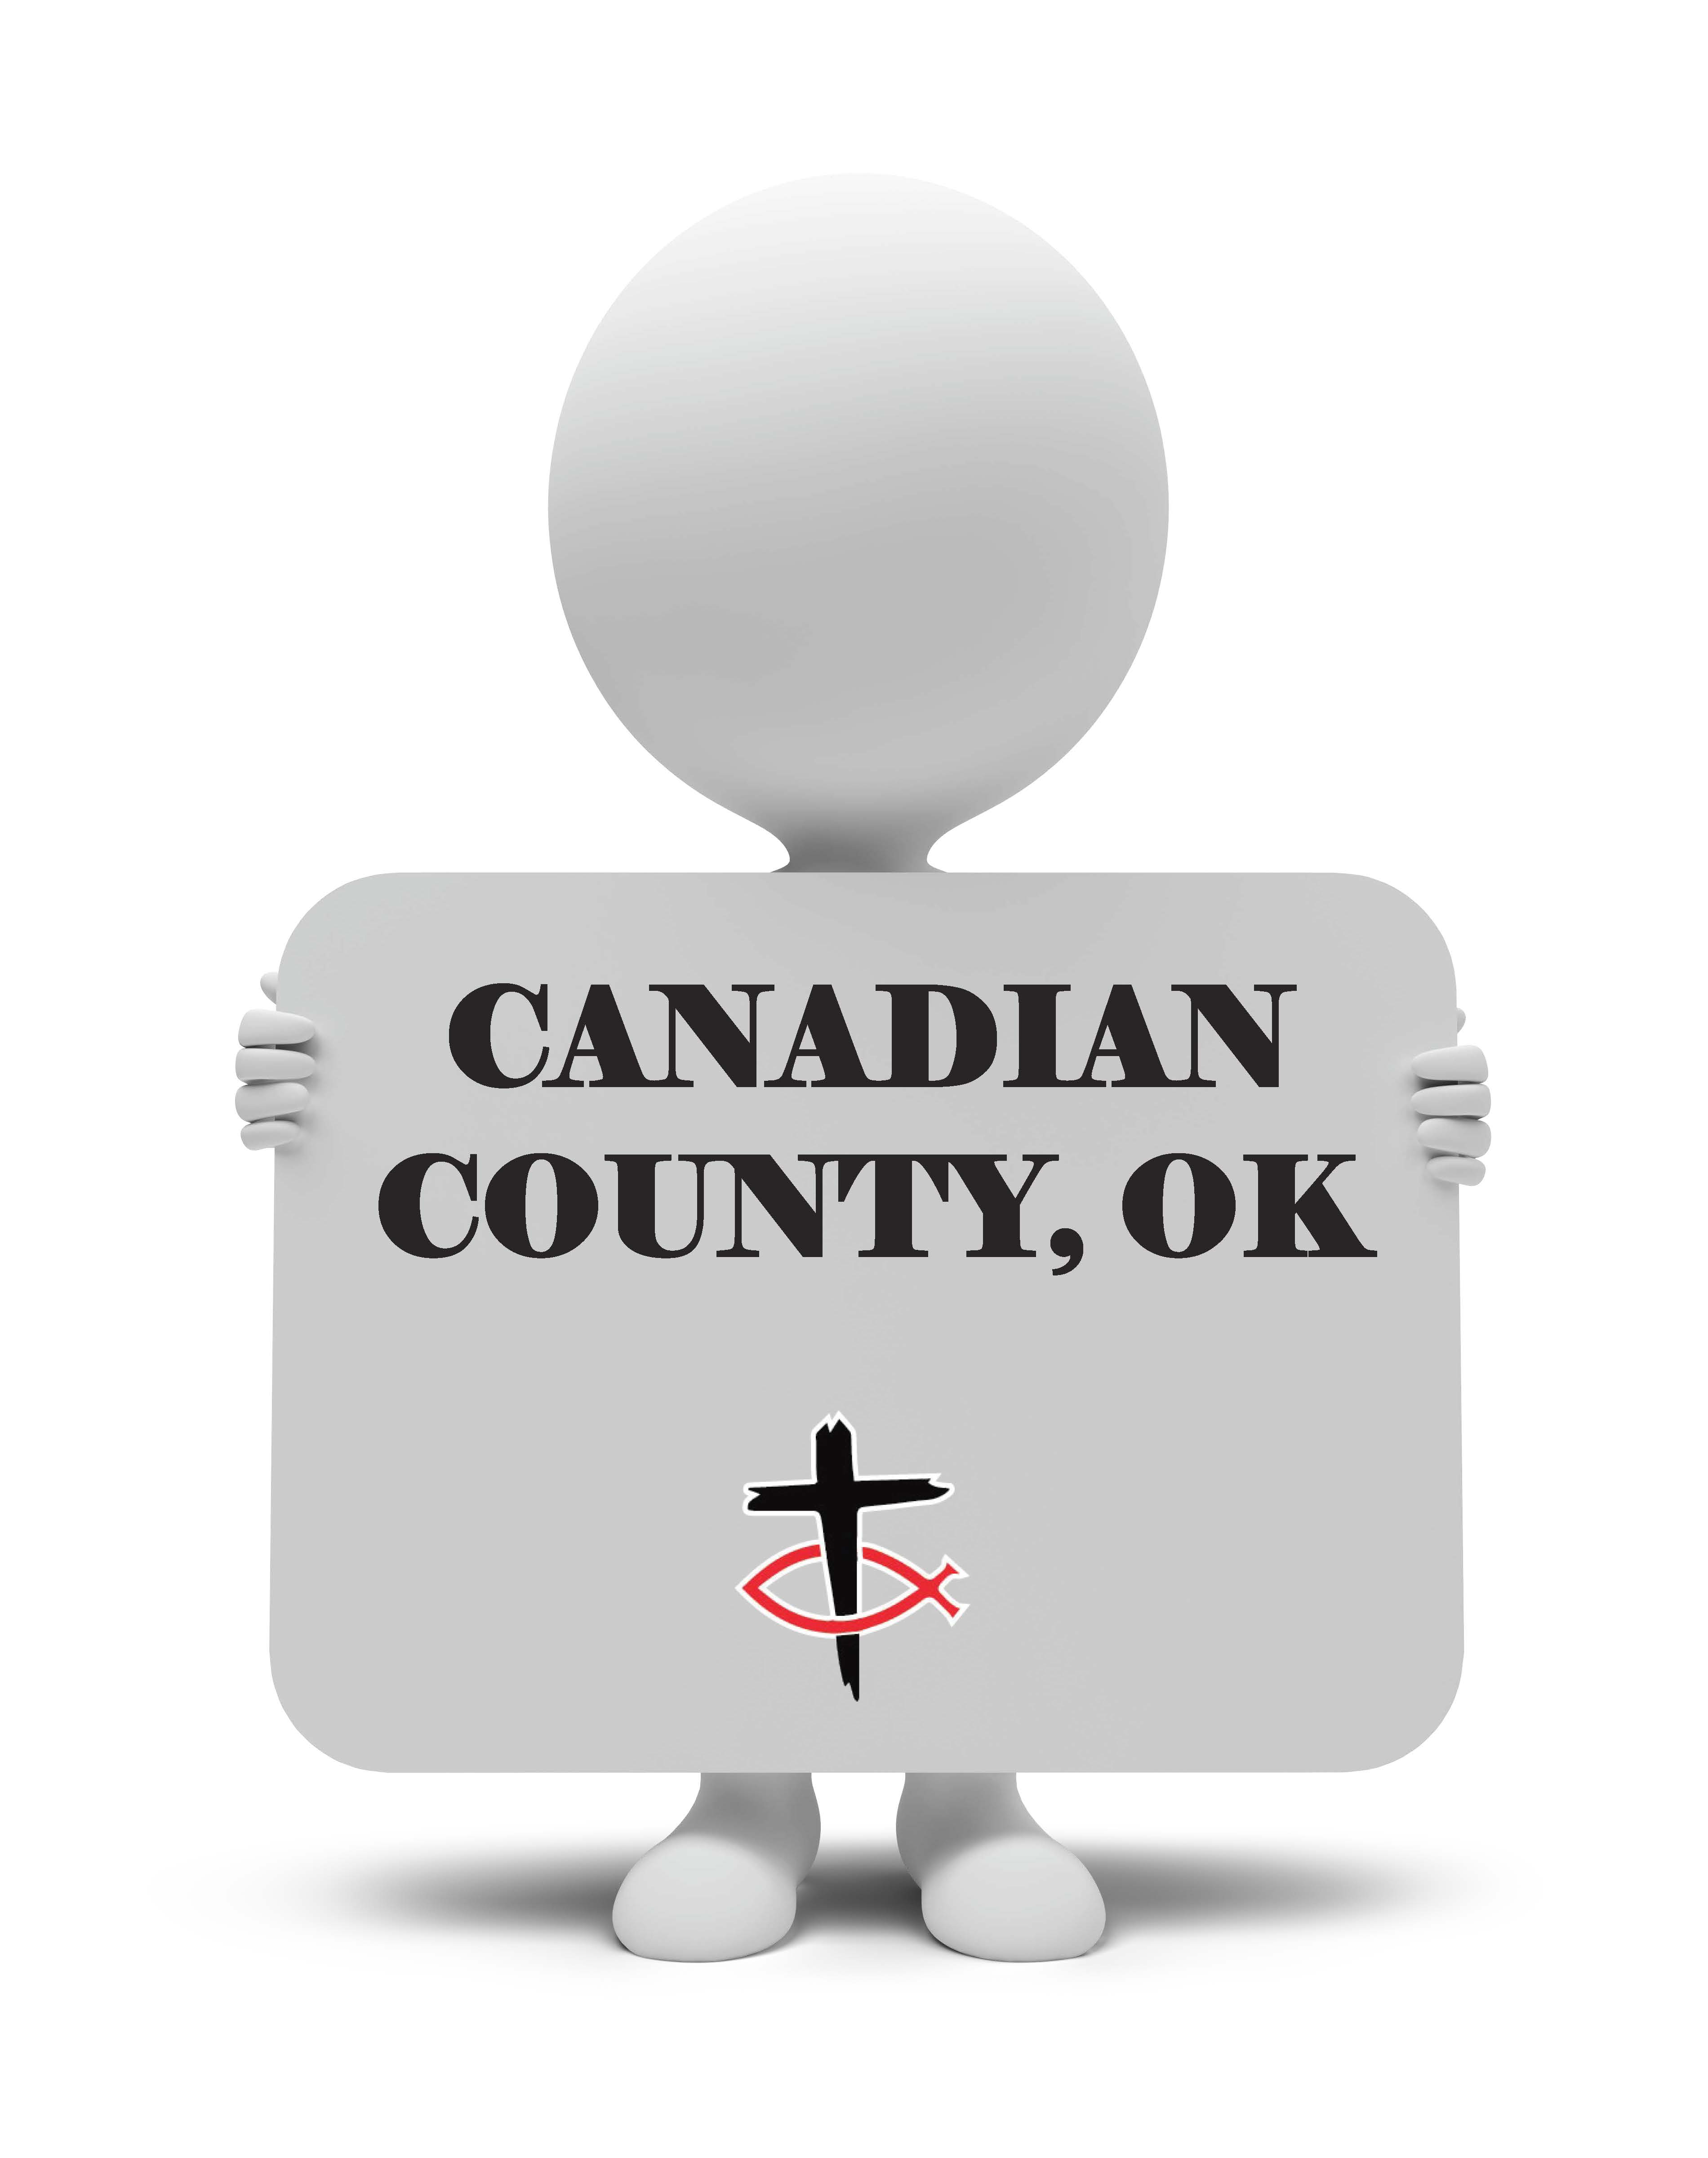 pick up the christian business print guide in canadian county ok